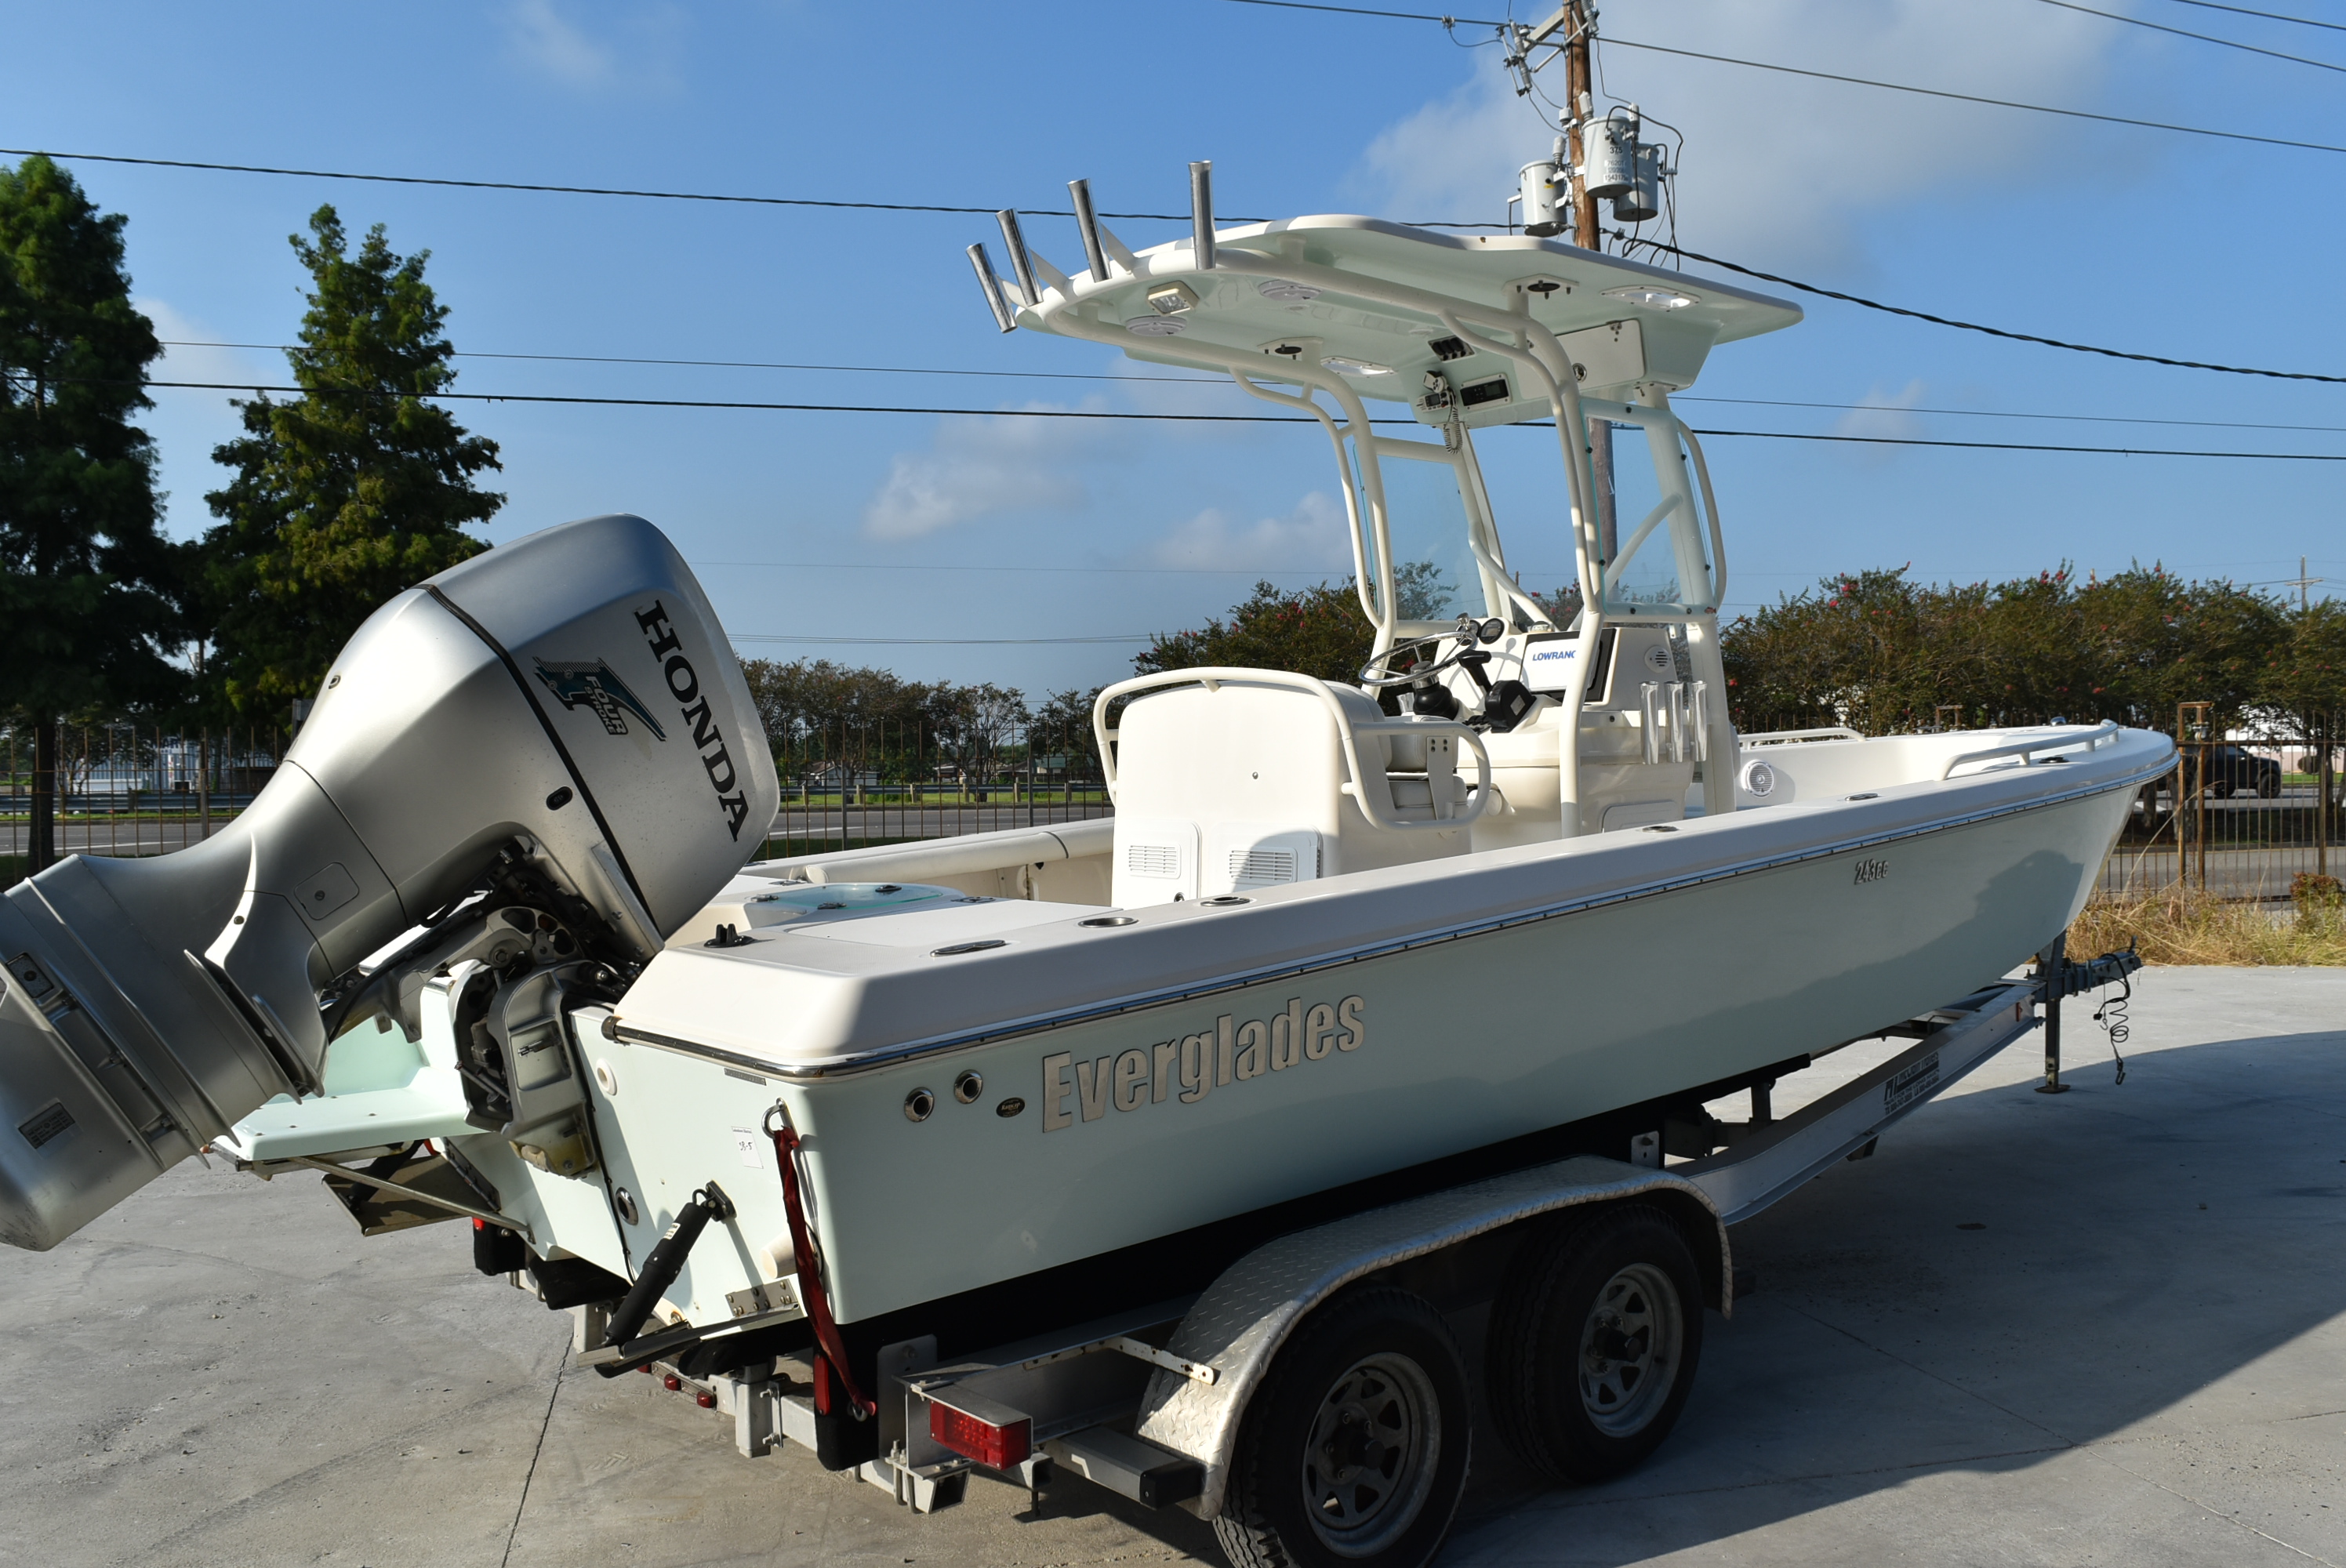 2007 Everglades boat for sale, model of the boat is 243 CC & Image # 10 of 15